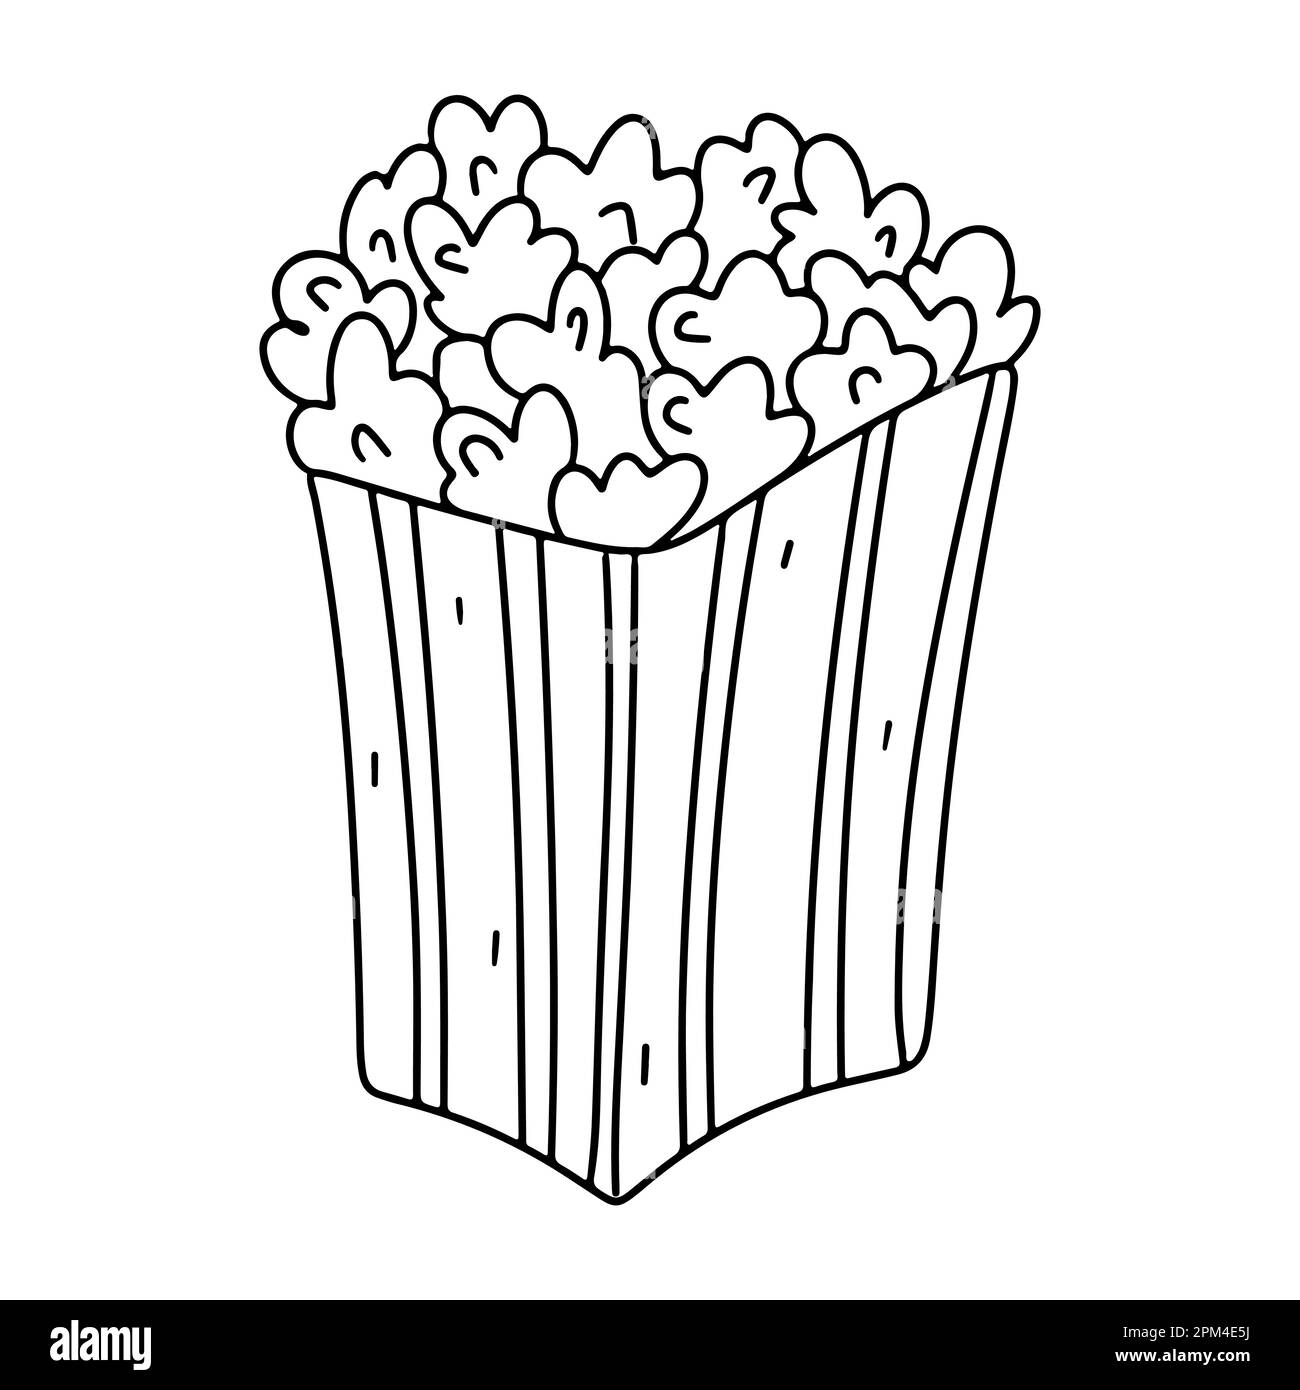 Pop corn vector black and white stock photos images